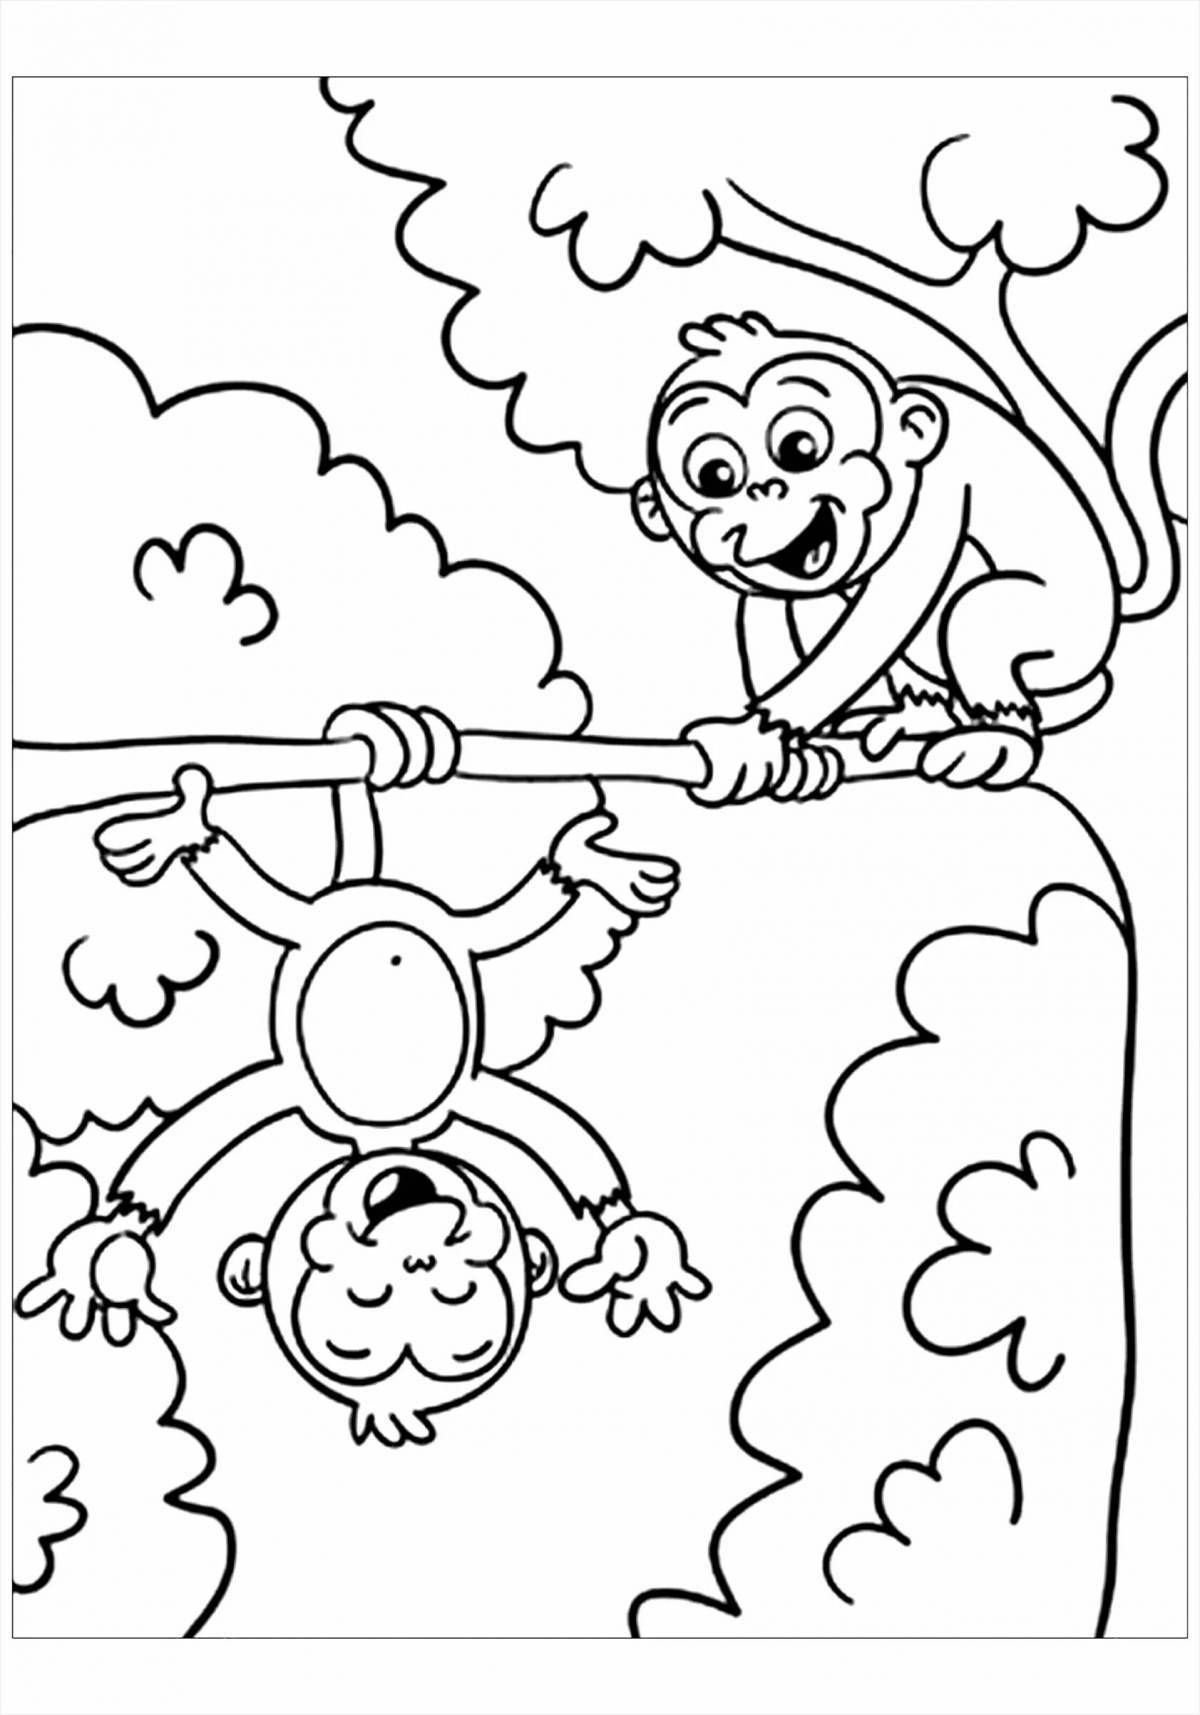 Color-frenzy decoy kid coloring page